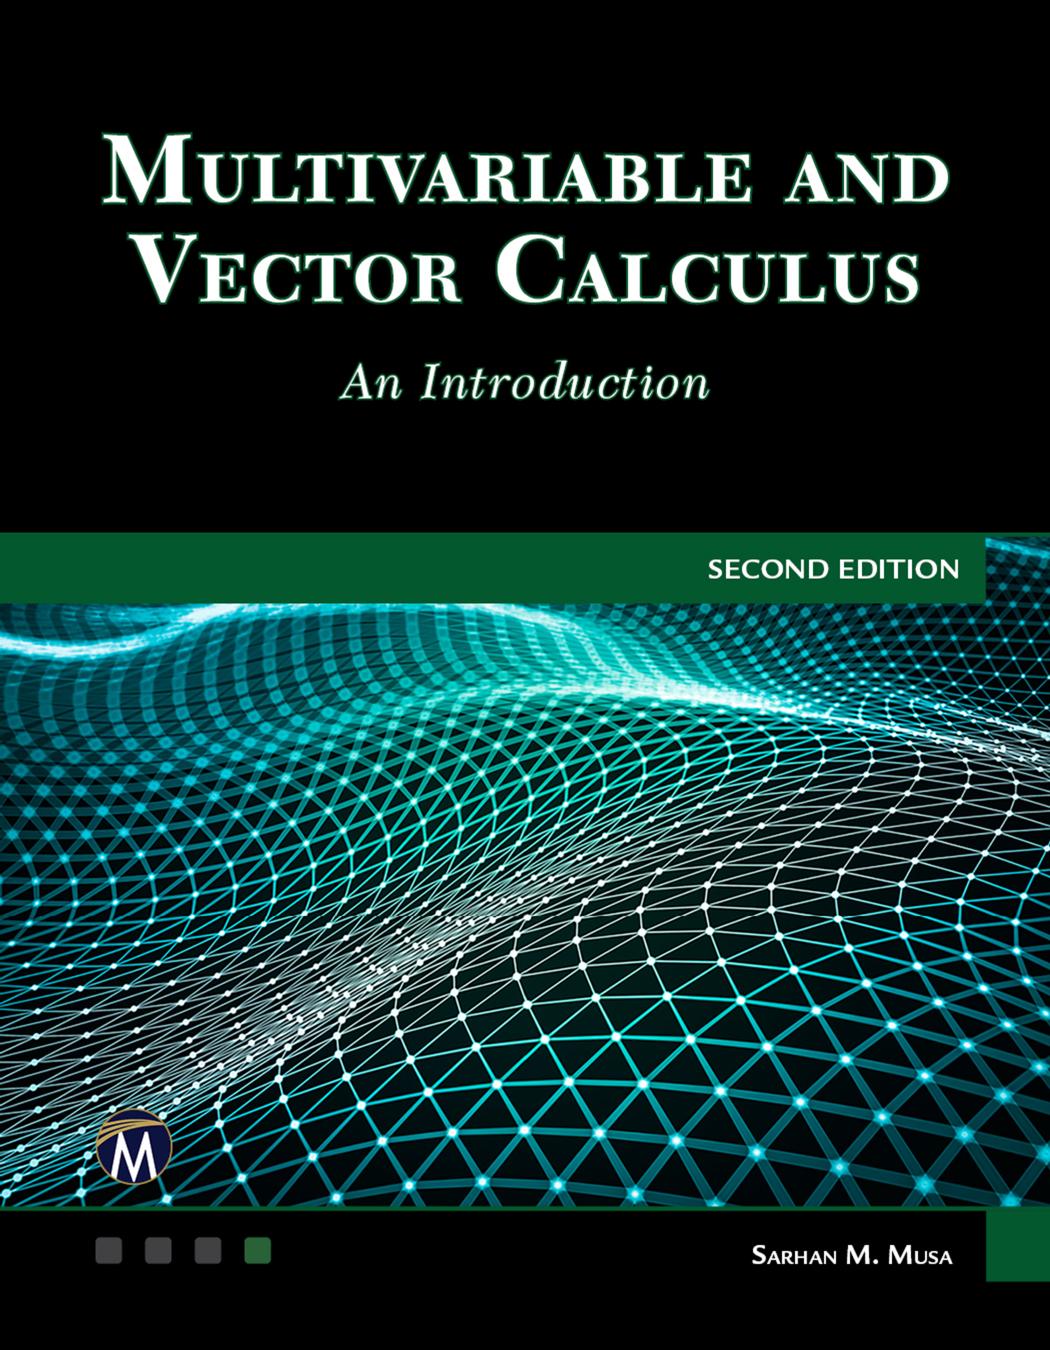 Multivariable and Vector Calculus. An Introduction by Sarhan M. Musa